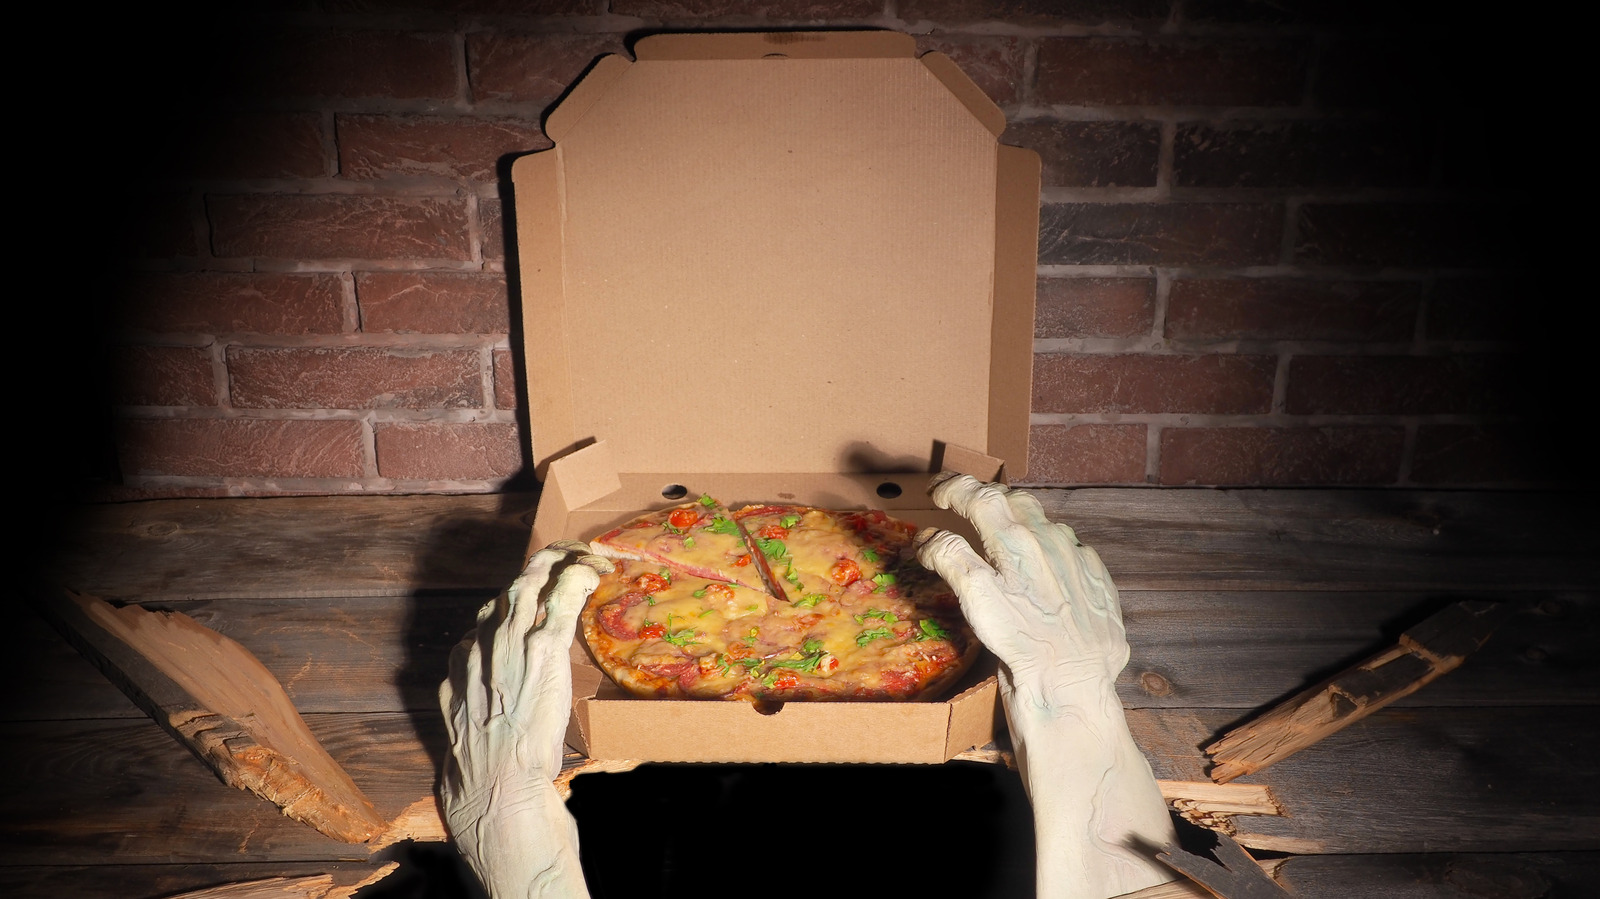 Grubhub Reports The Top Orders For Late-Night Halloween Snacking